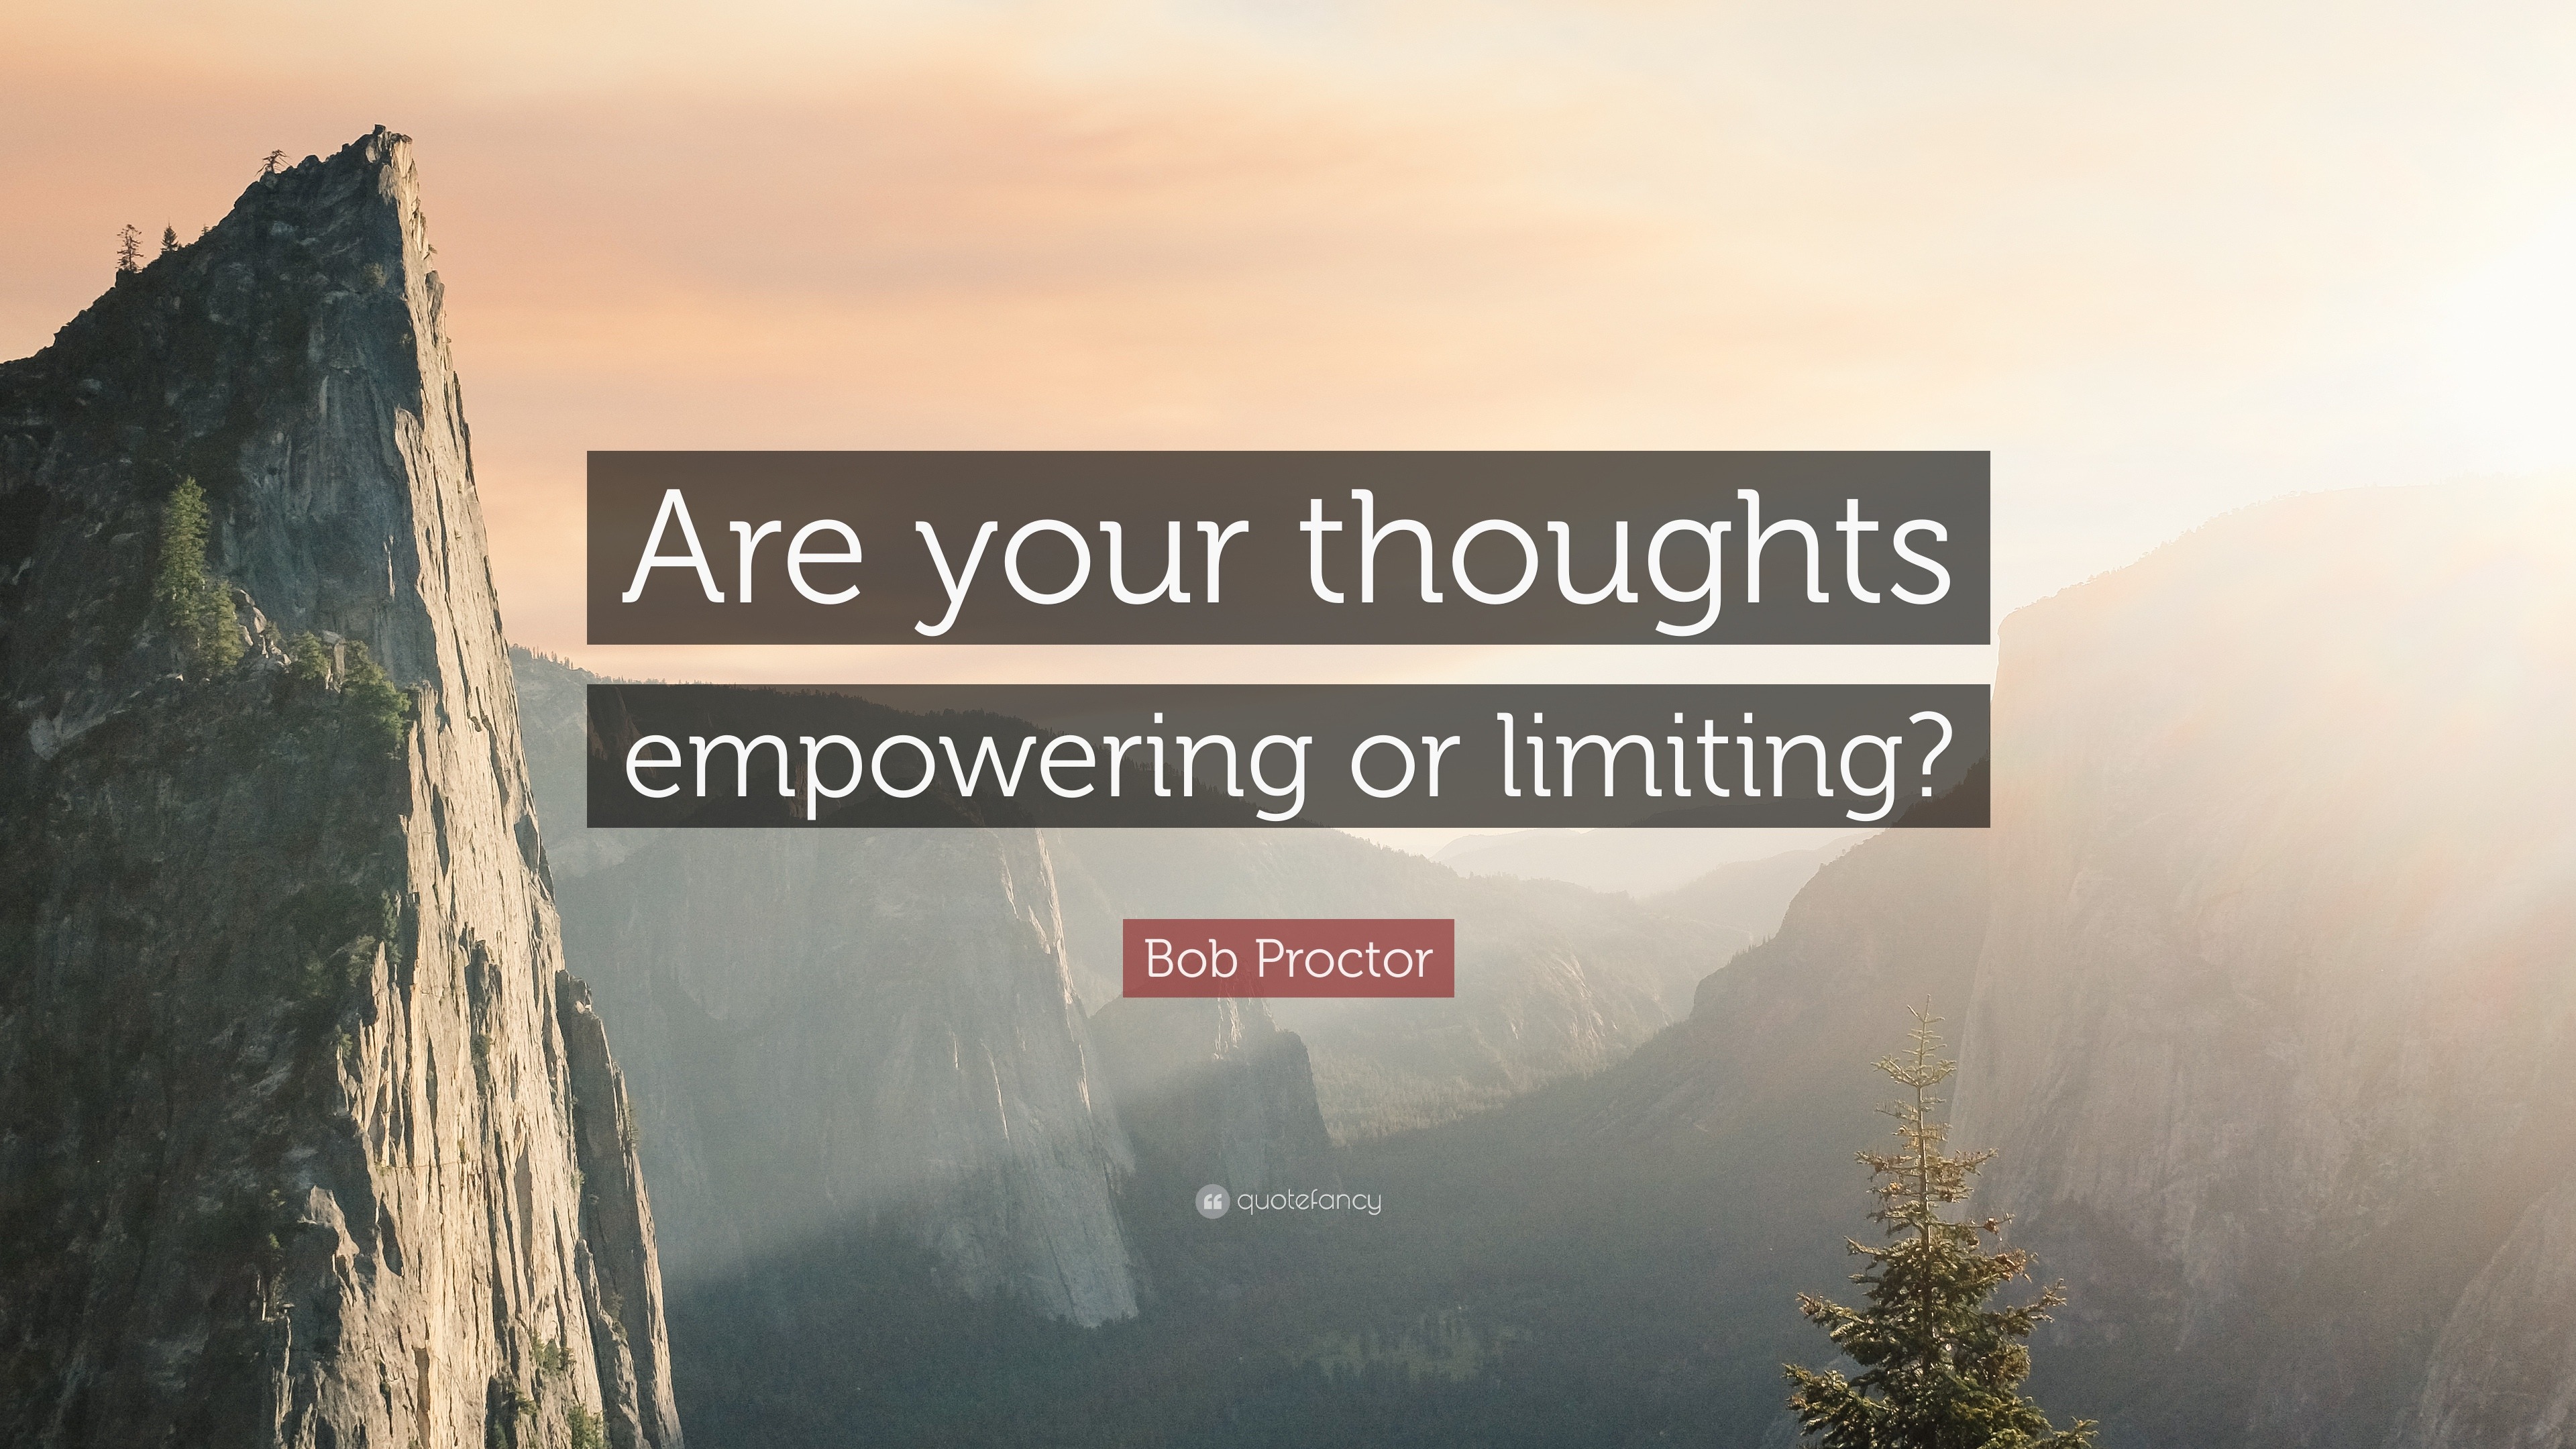 Bob Proctor Quote: “Are your thoughts empowering or limiting?”